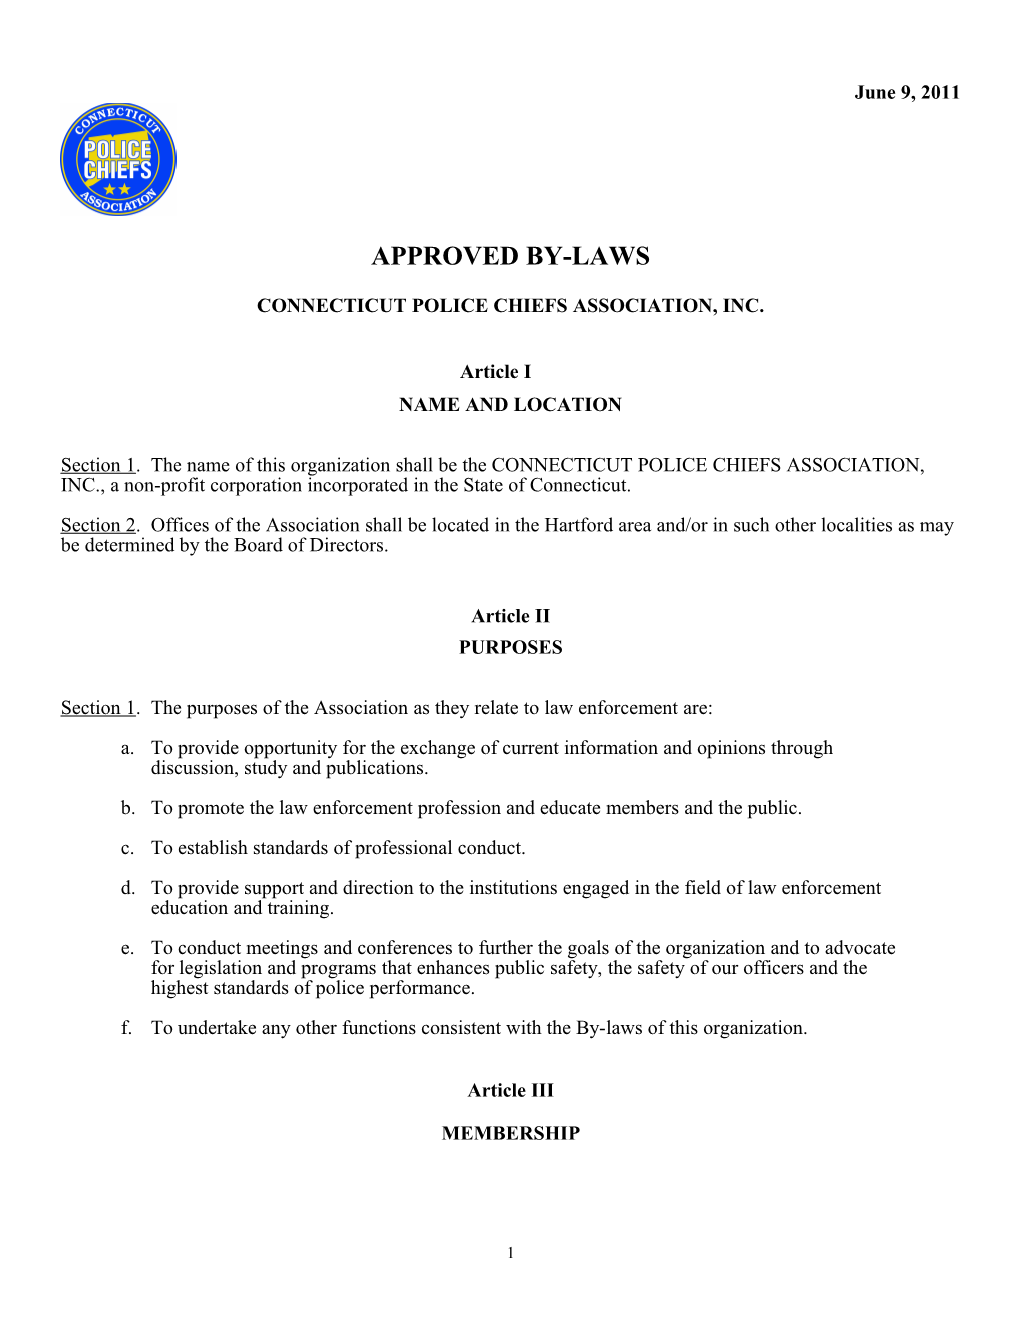 BYLAWS - Draft Copy with Changes from Ed Lynch